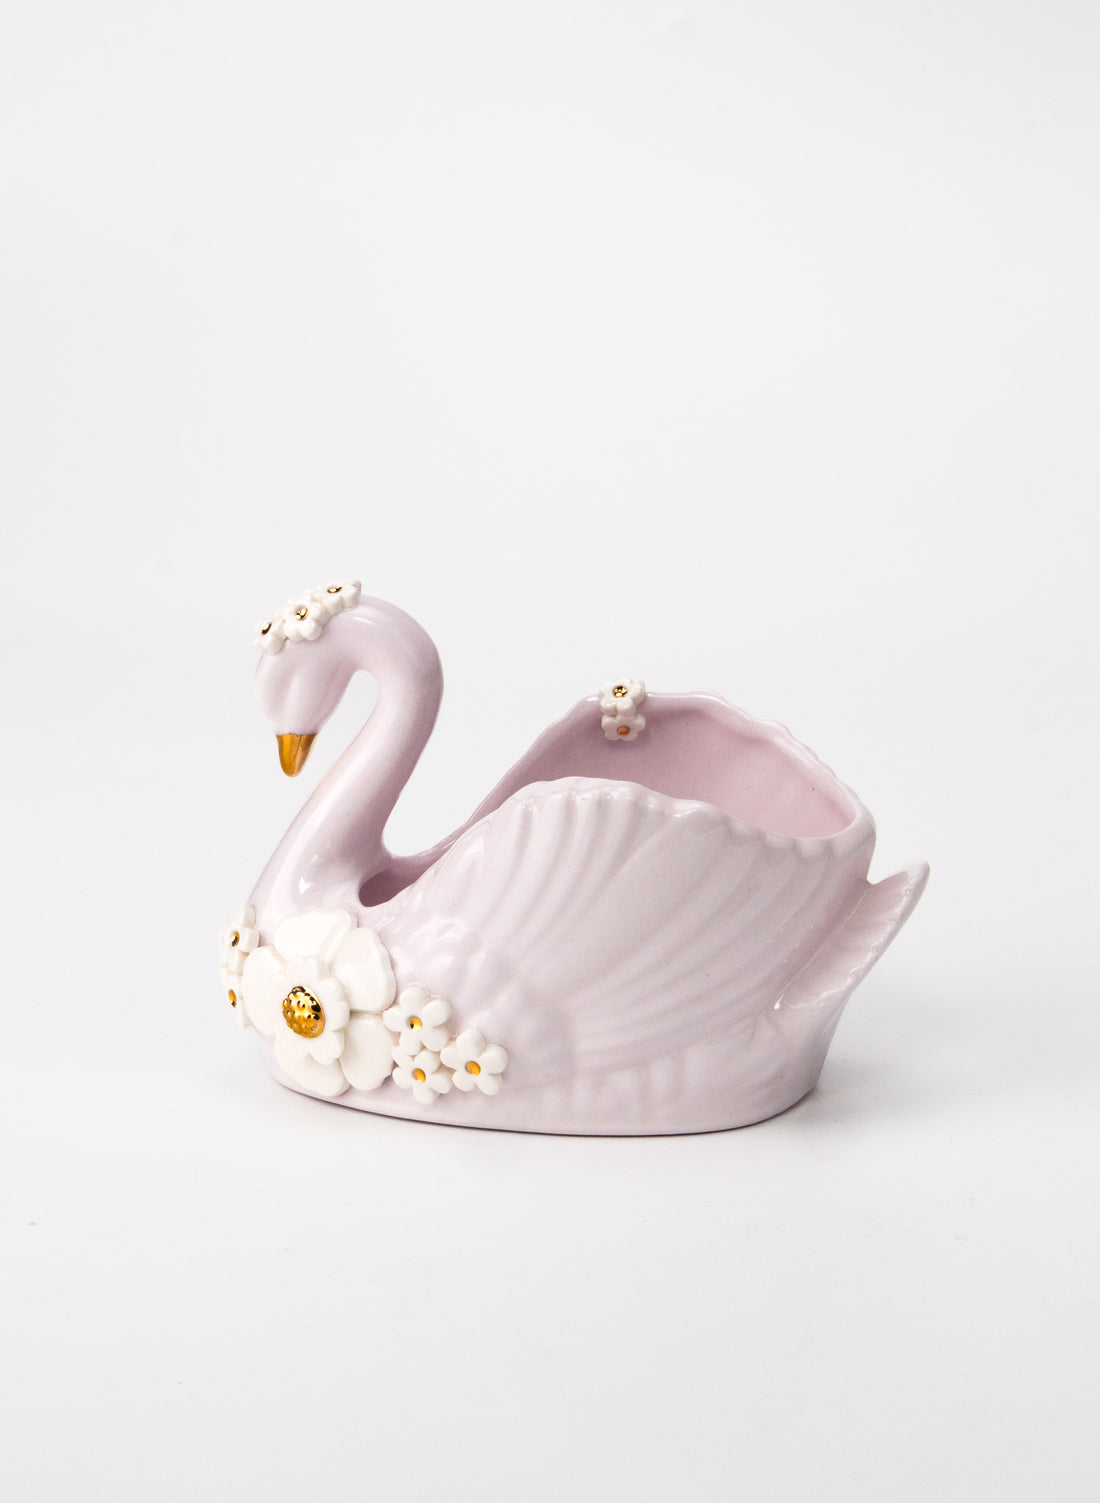 Small Light Pastel Pink Swan with Gold and White Flowers